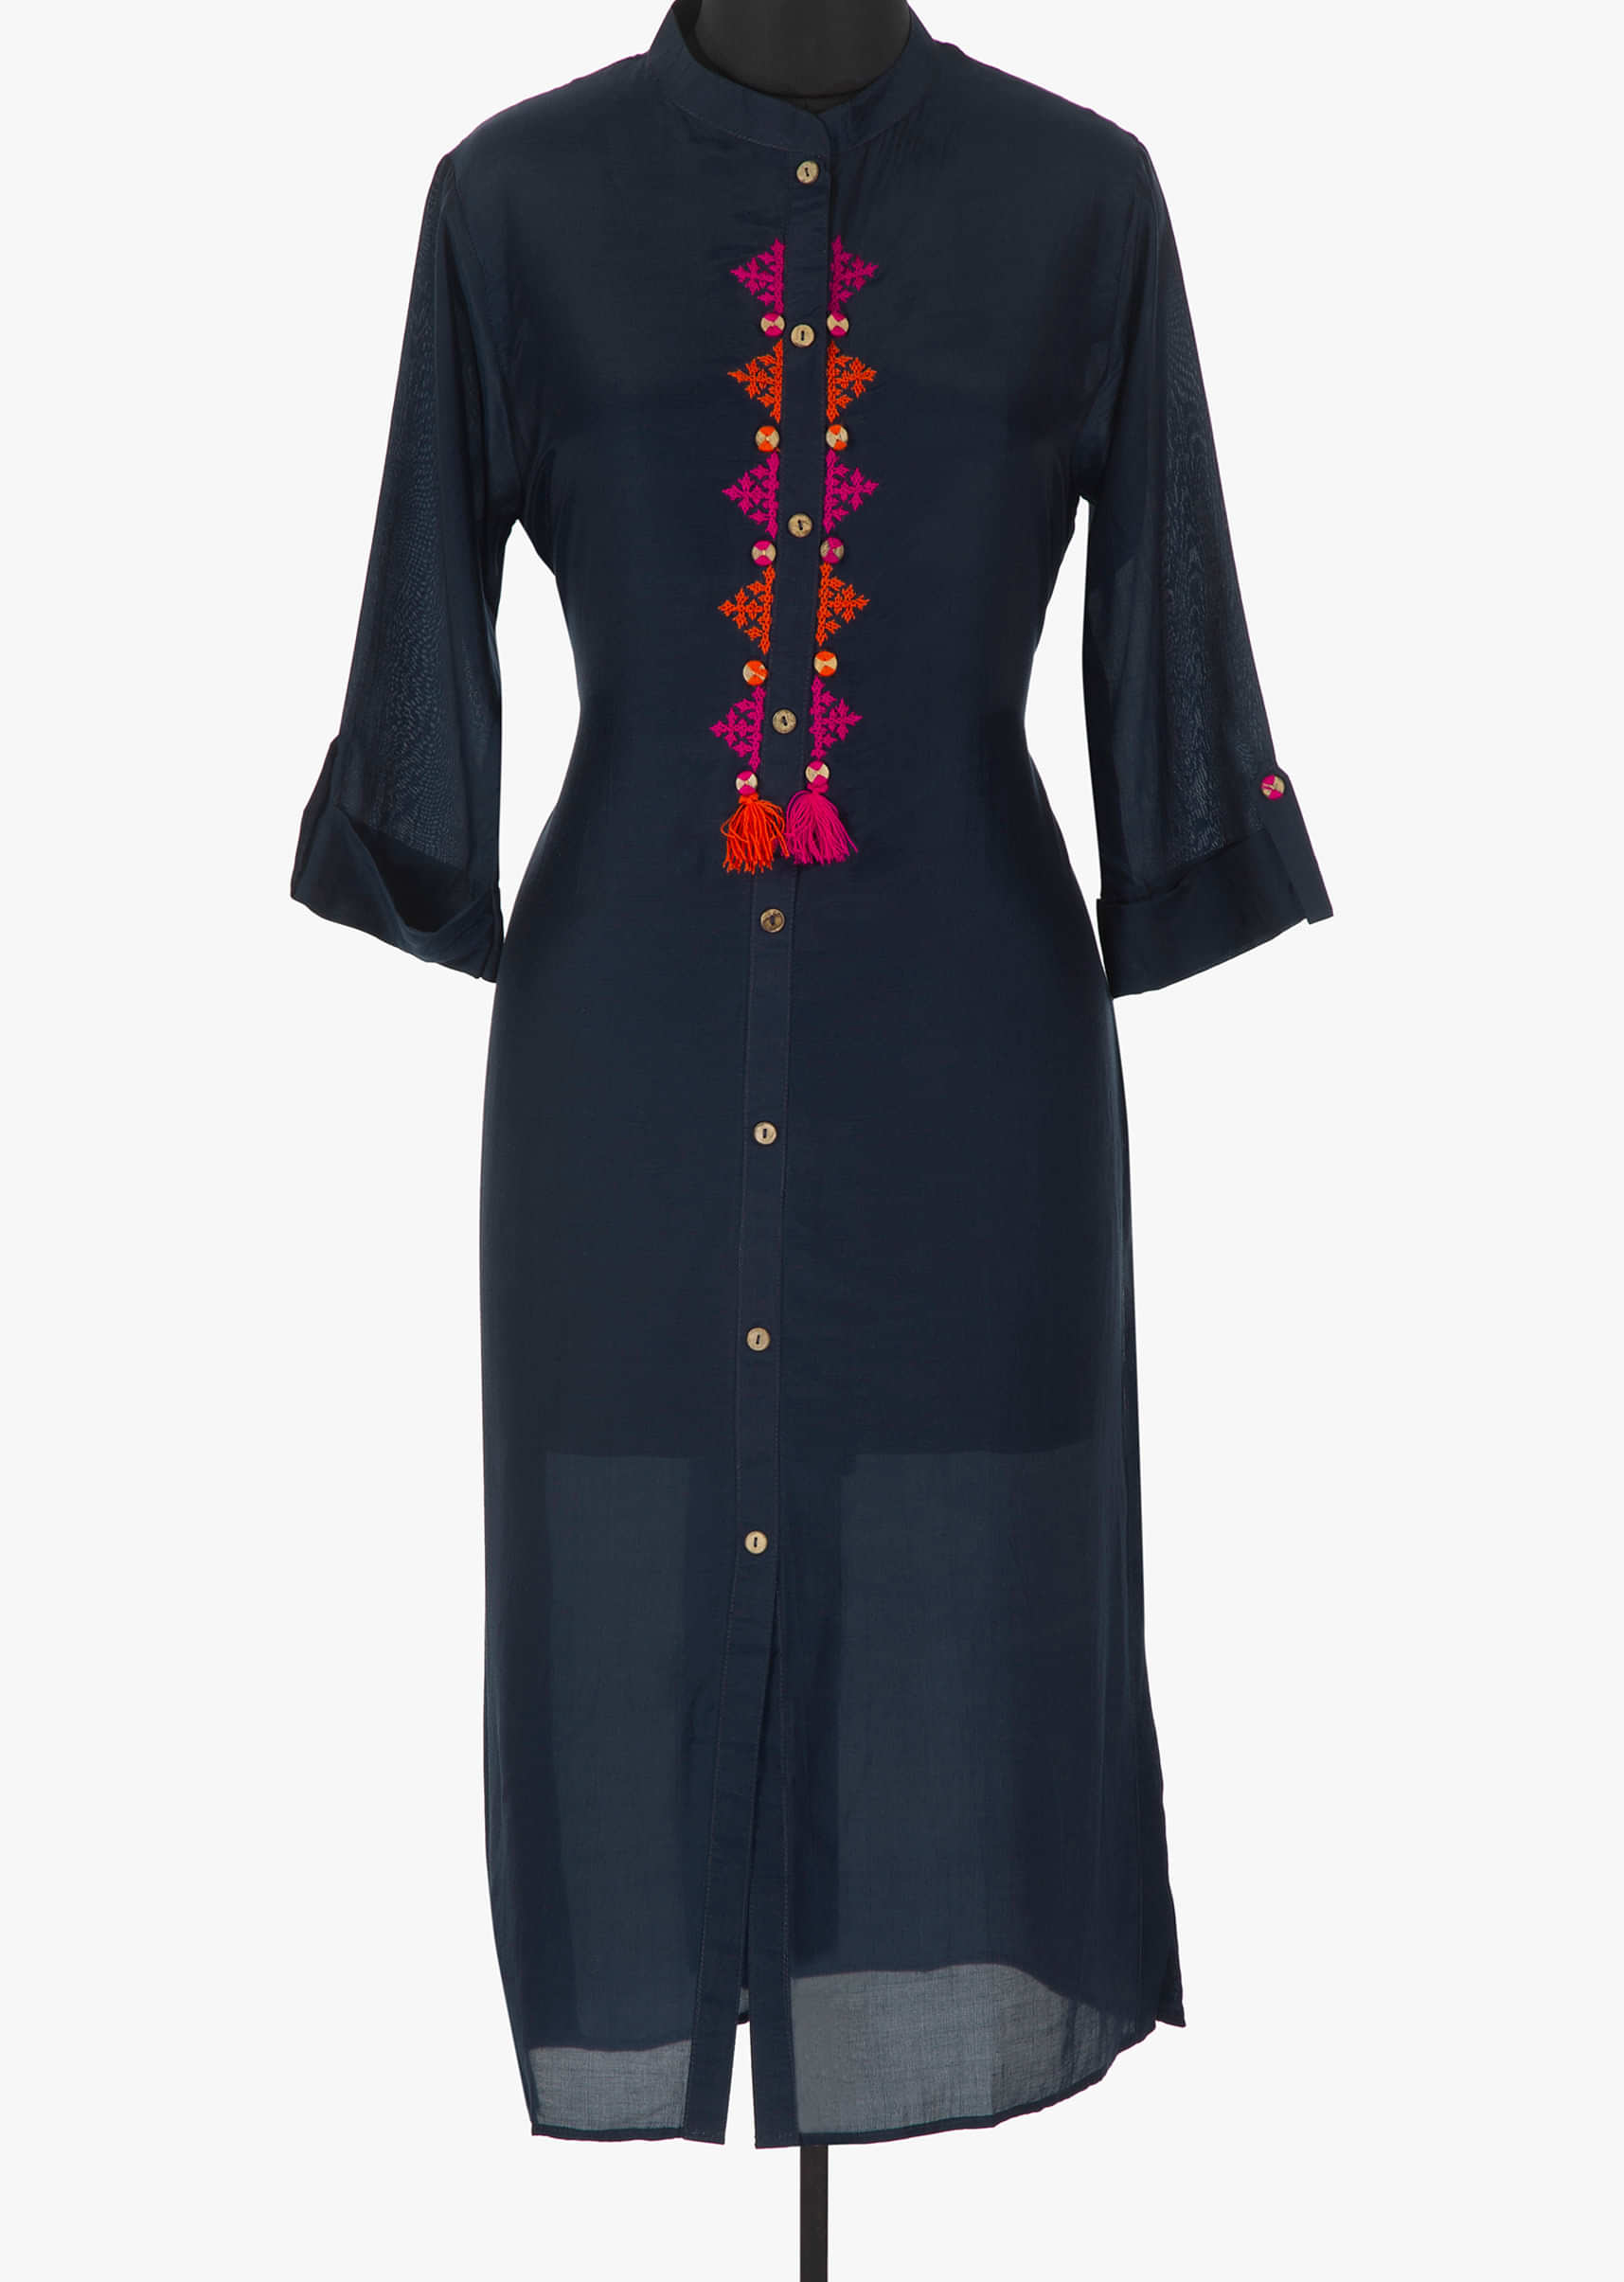 Twilight blue kurti in georgette with embroidered placket in thread only on Kalki